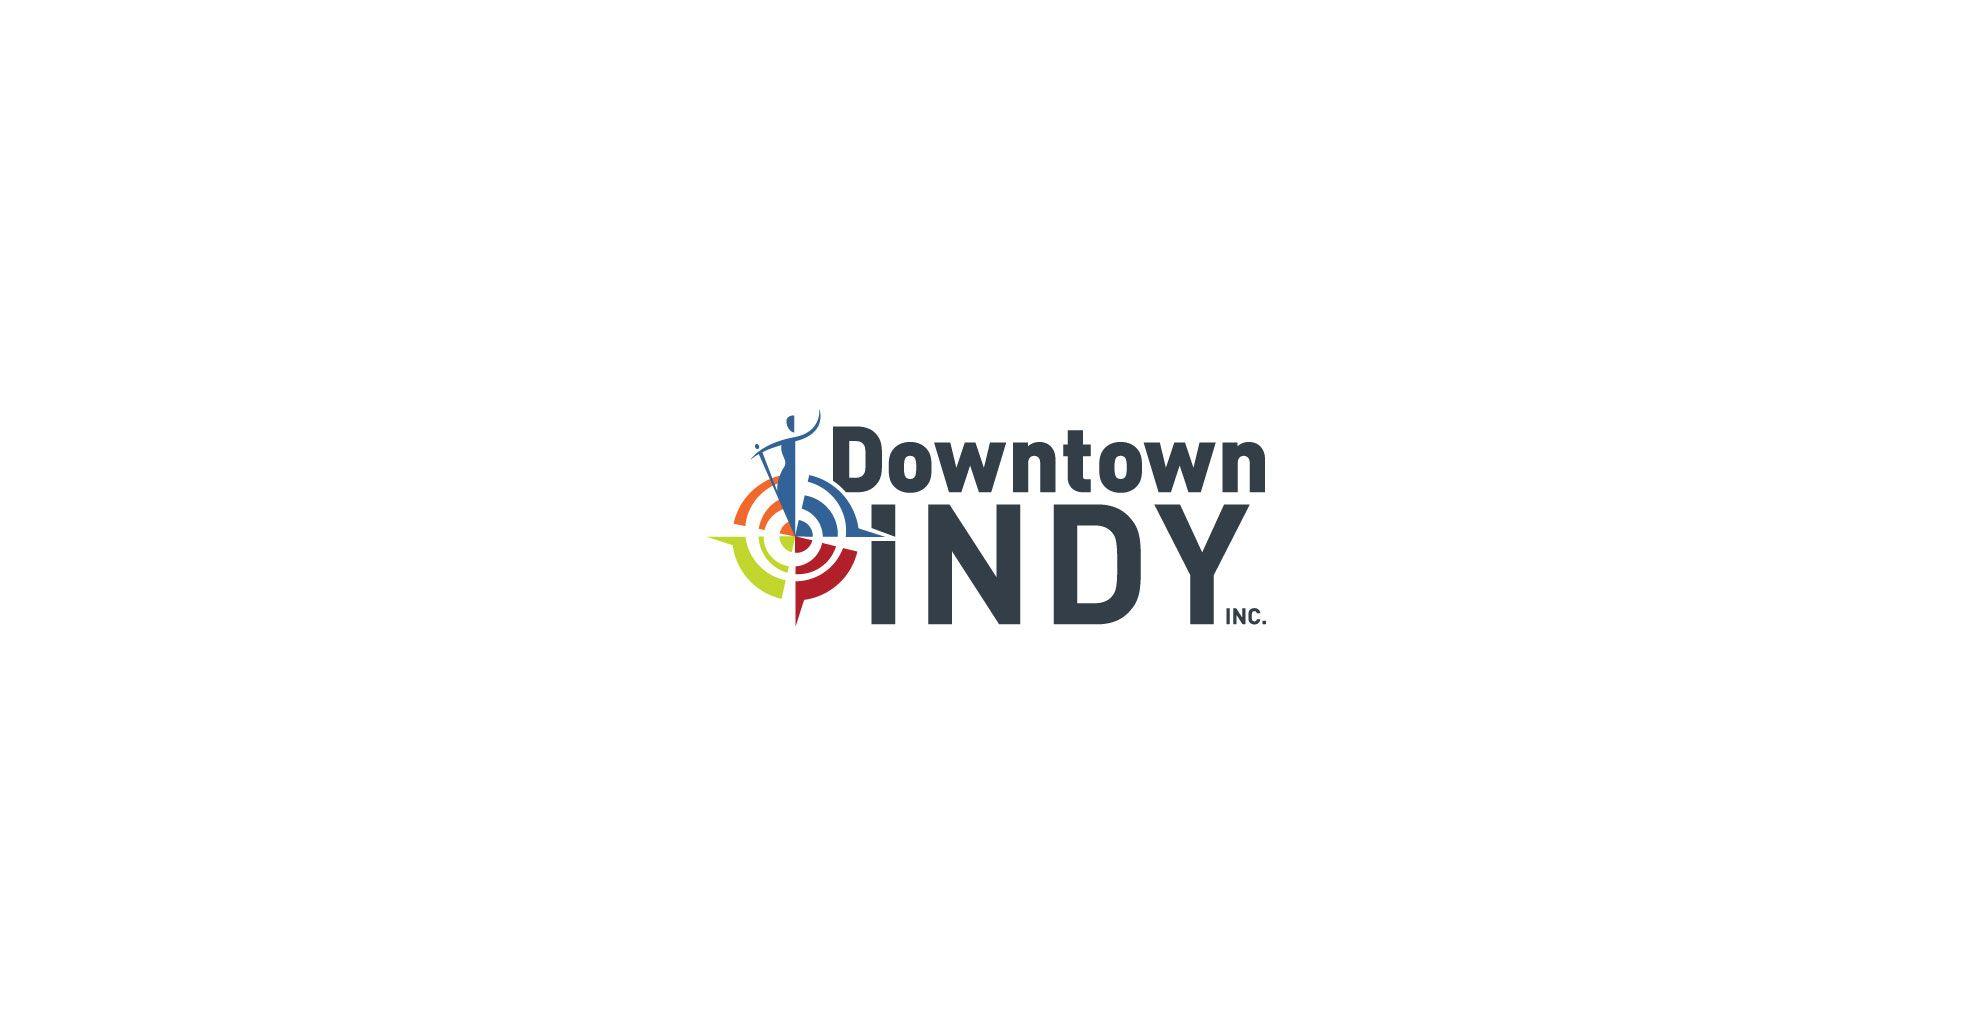 Indy Logo - Downtown Indy, Inc.